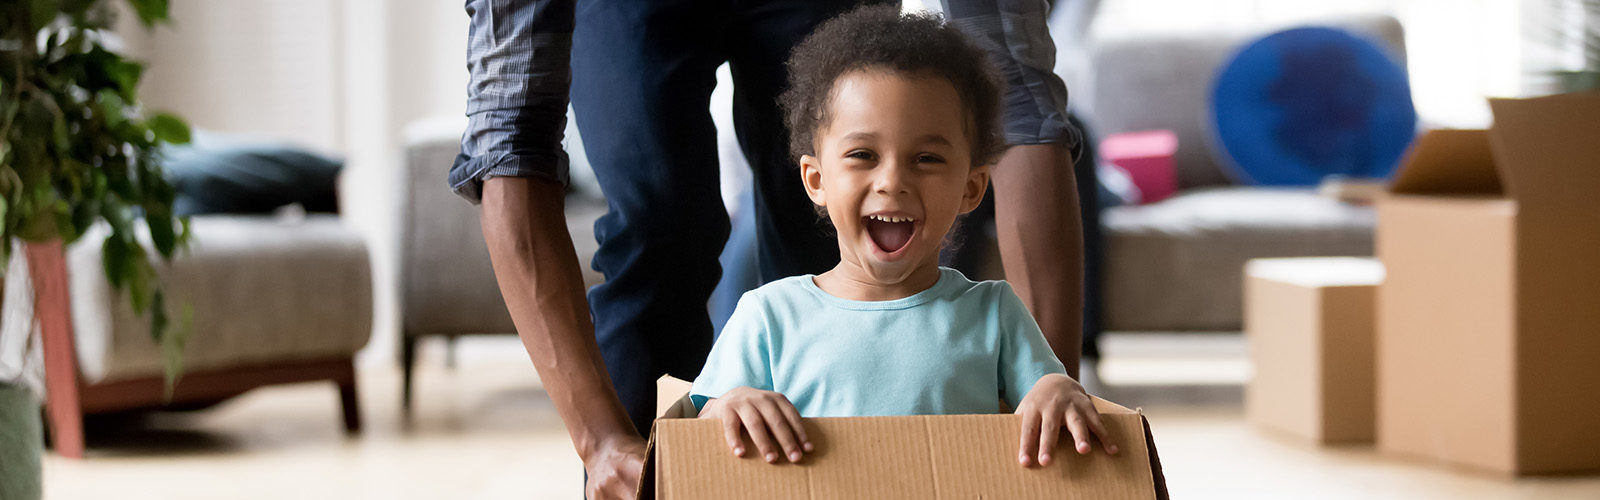 laughing child in a box being pushed around a living room by an adult